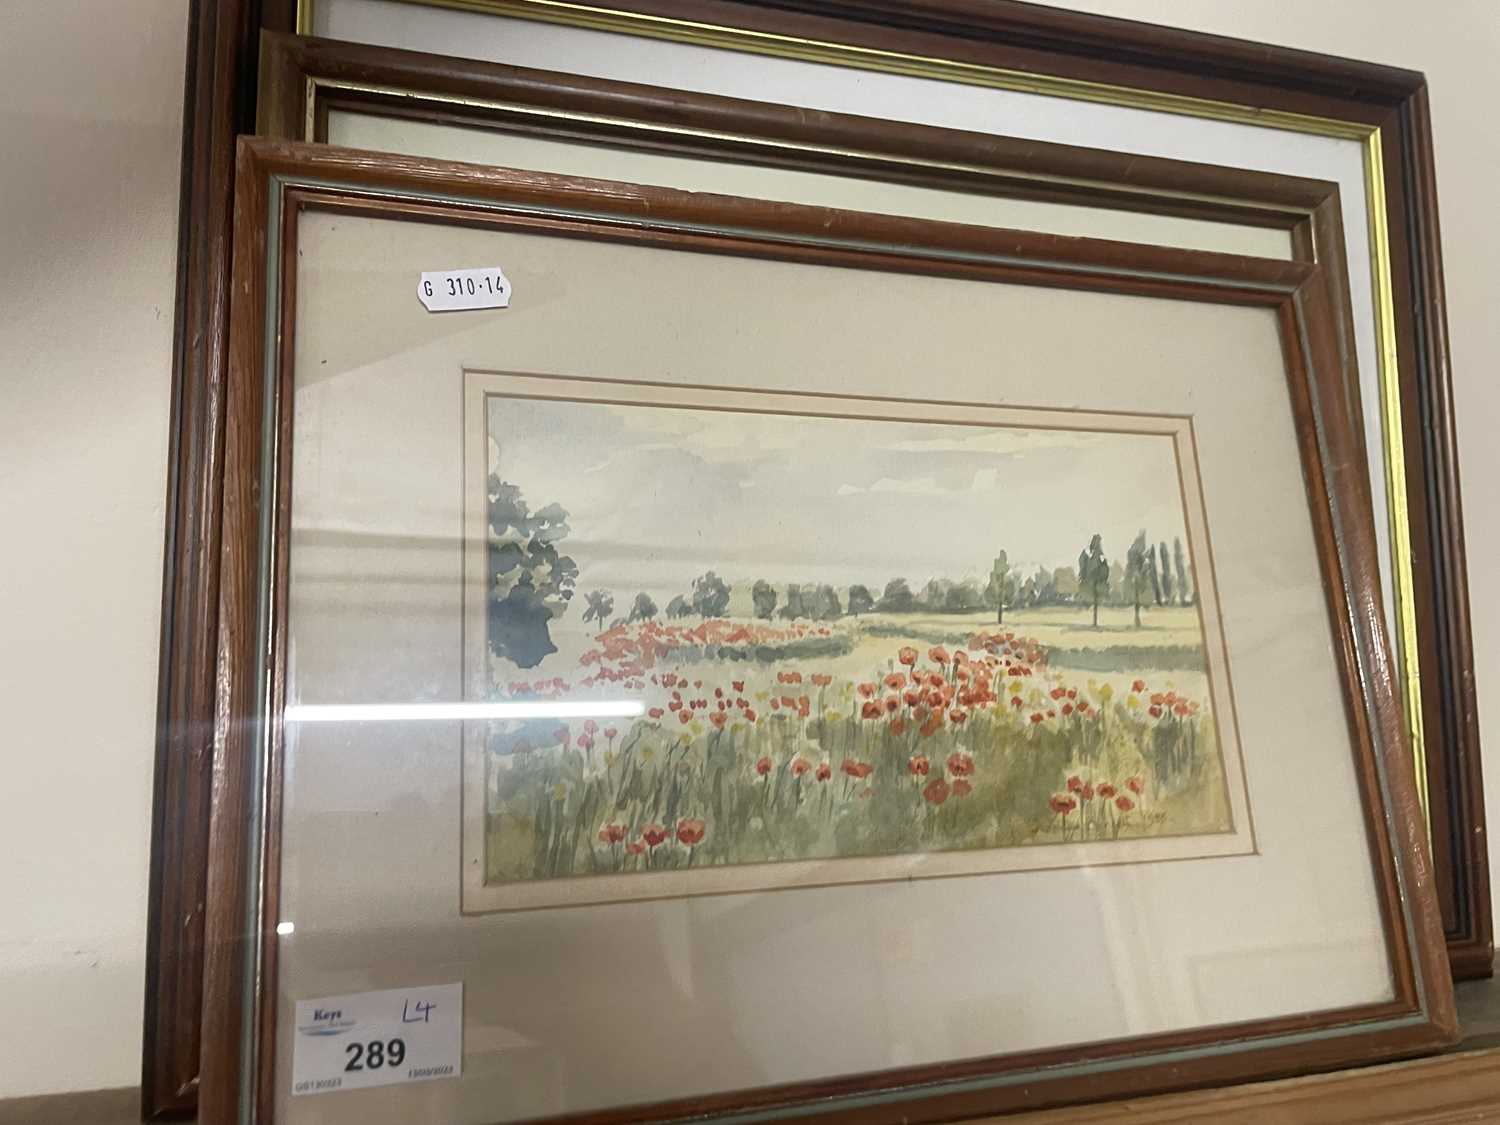 Poppies in a field by S Dennett, 1985, framed and glazed together with an engraving of The - Image 2 of 4